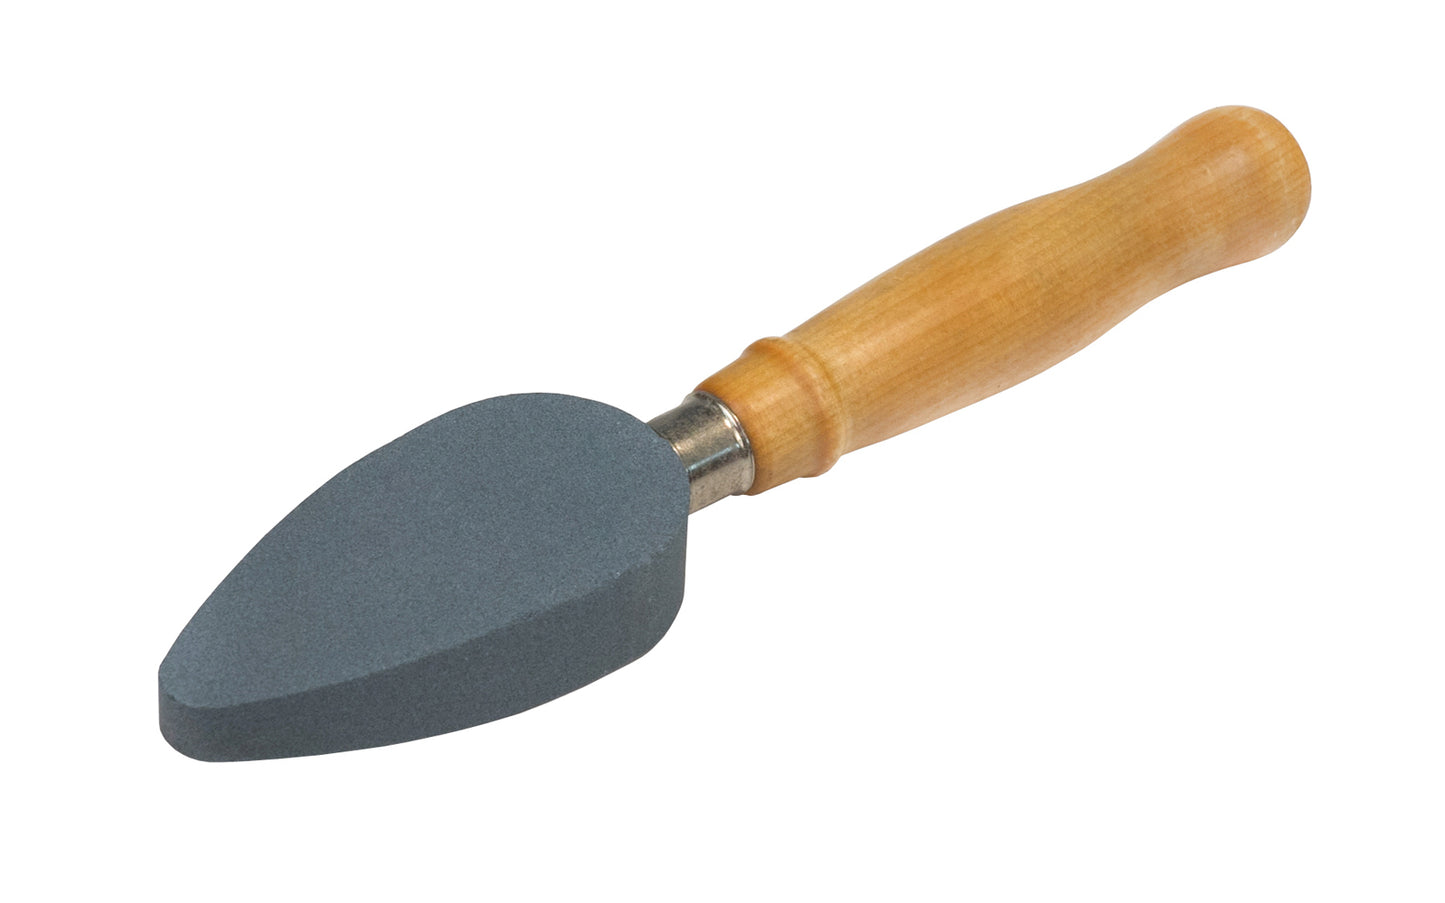 Knife & Tool Sharpening Stone with Handle ~ Fine - Model No. 87939 ~ Rounded wedge-shaped stone ~ Silicon carbide abrasive stone ~ Fine grit ~ Wooden handle & ferrule attached to stone ~ Great for sharpening a wide variety of tools ~ Made in USA